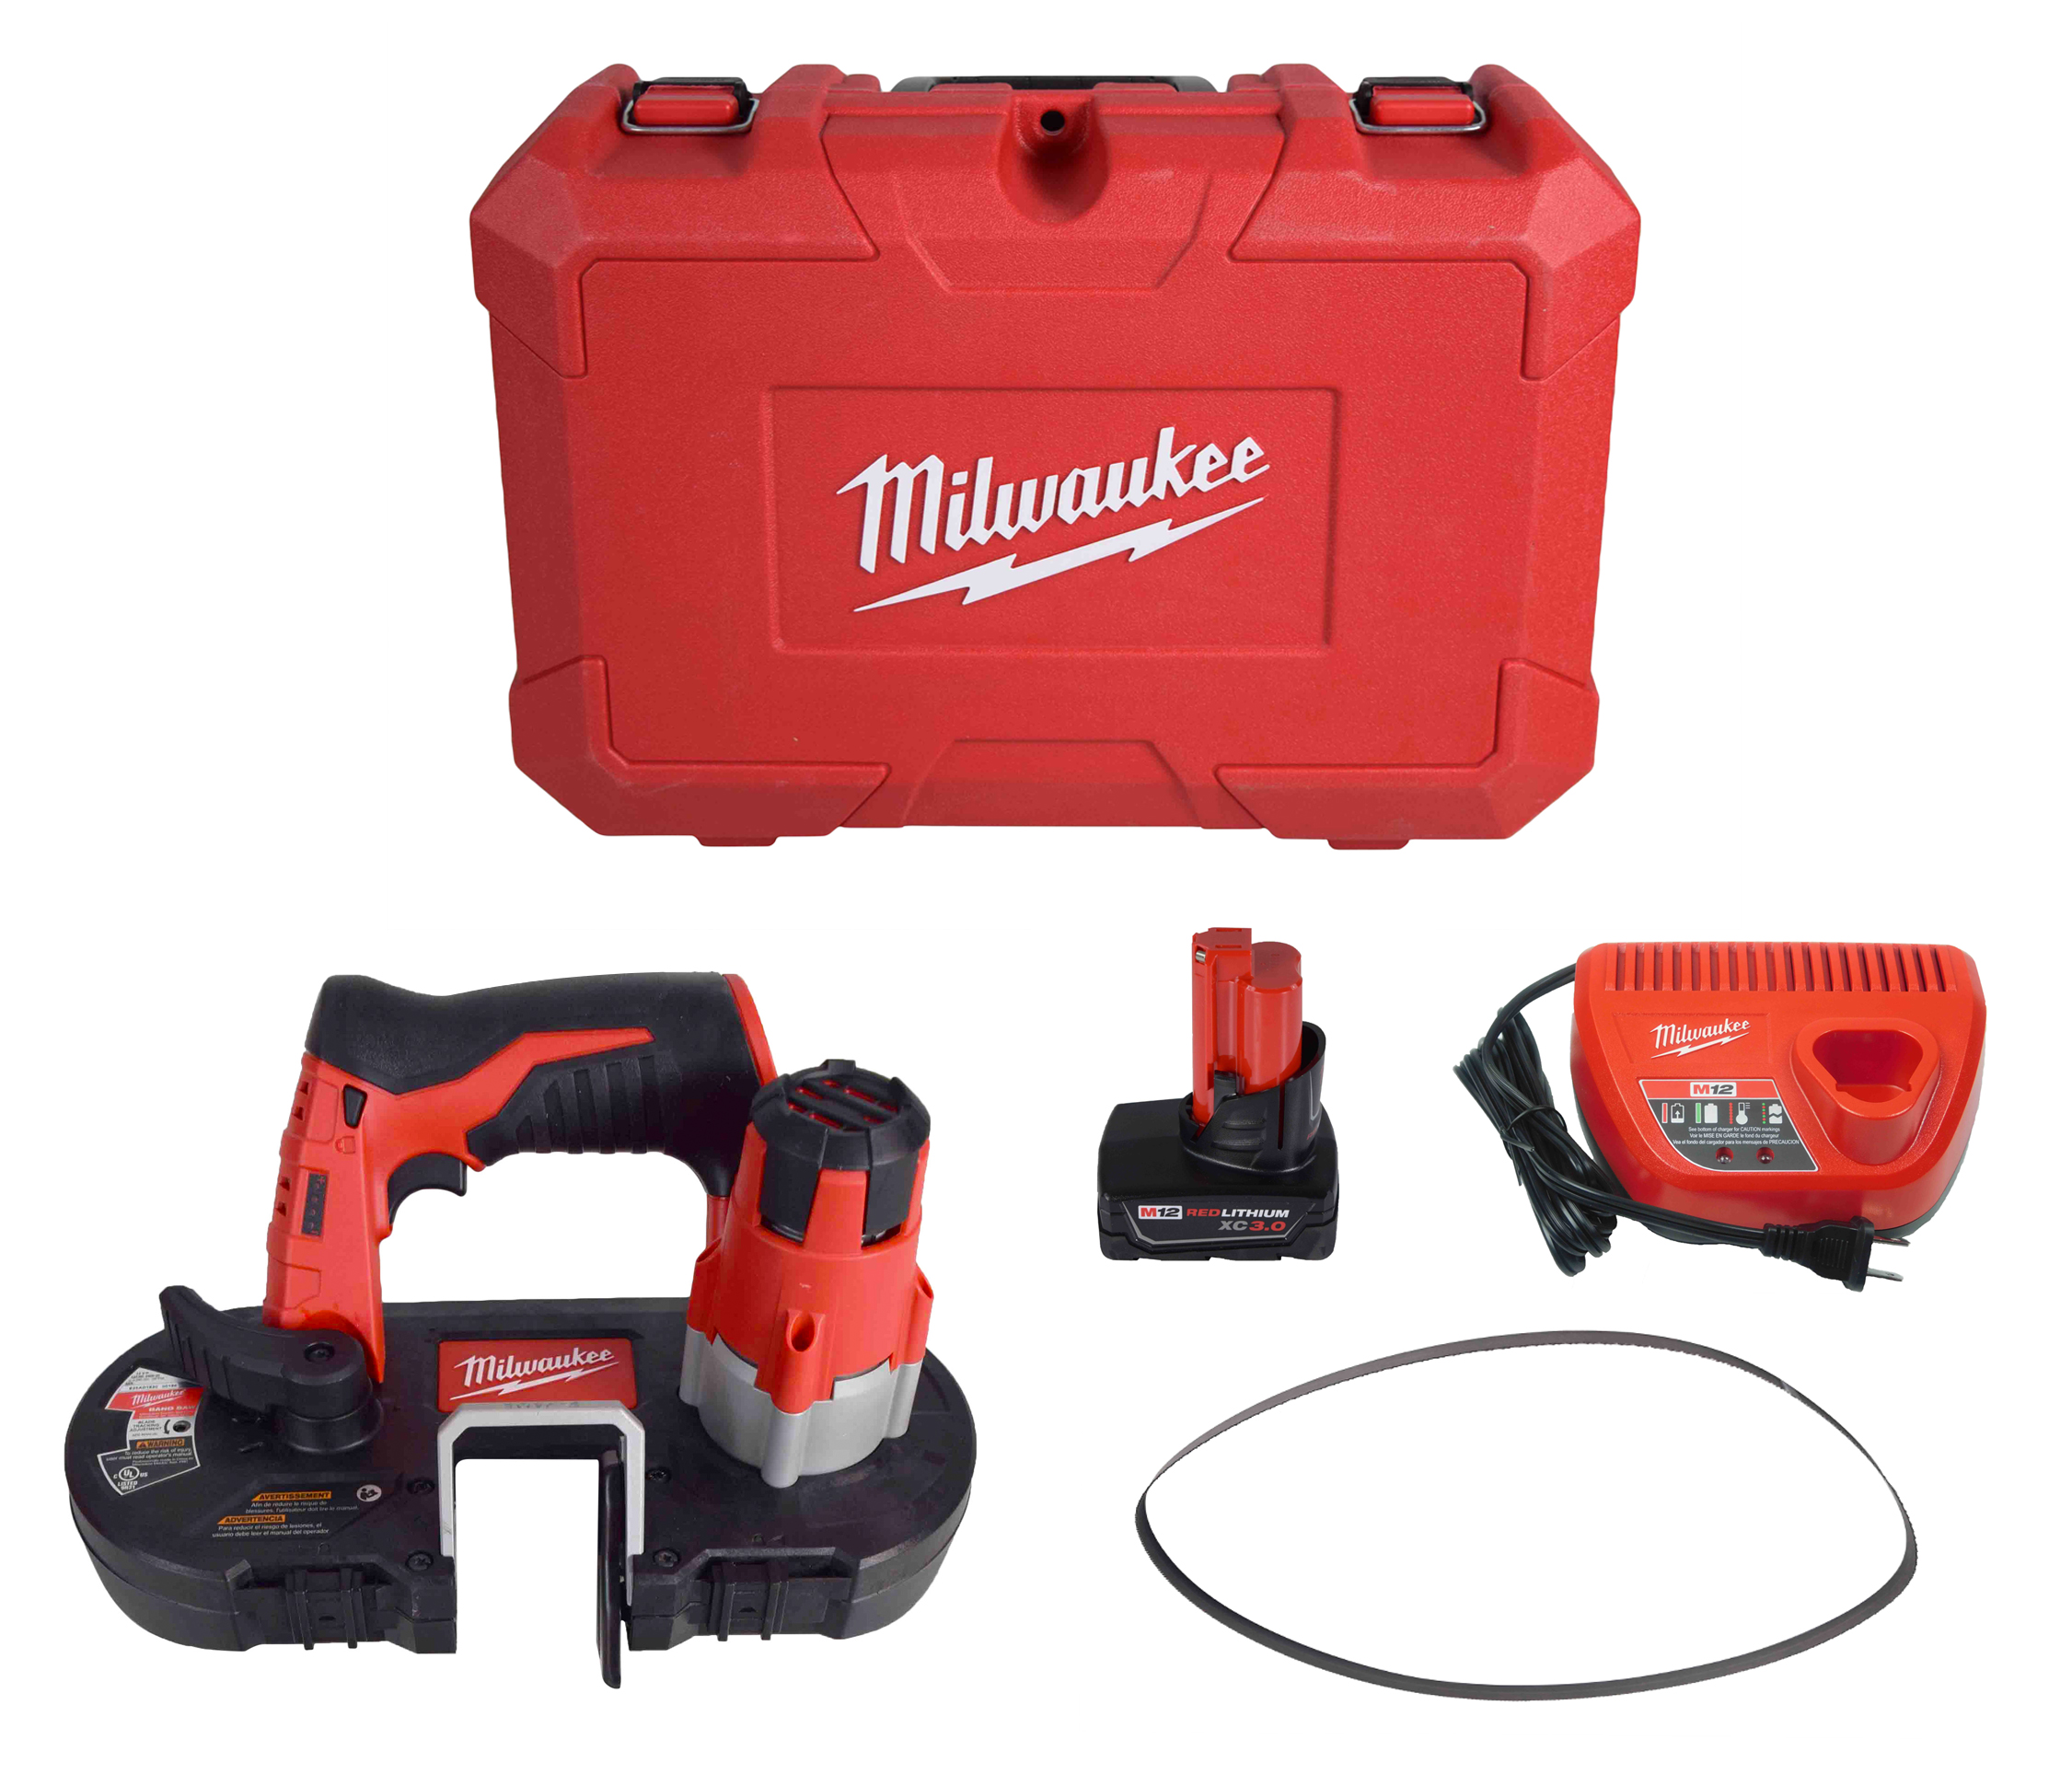 Milwaukee M12 12V Cordless Sub-Compact Band Saw Kit 2429-21XC with 3Ah  Battery, Charger, 18 TPI Blade,  Tool Case